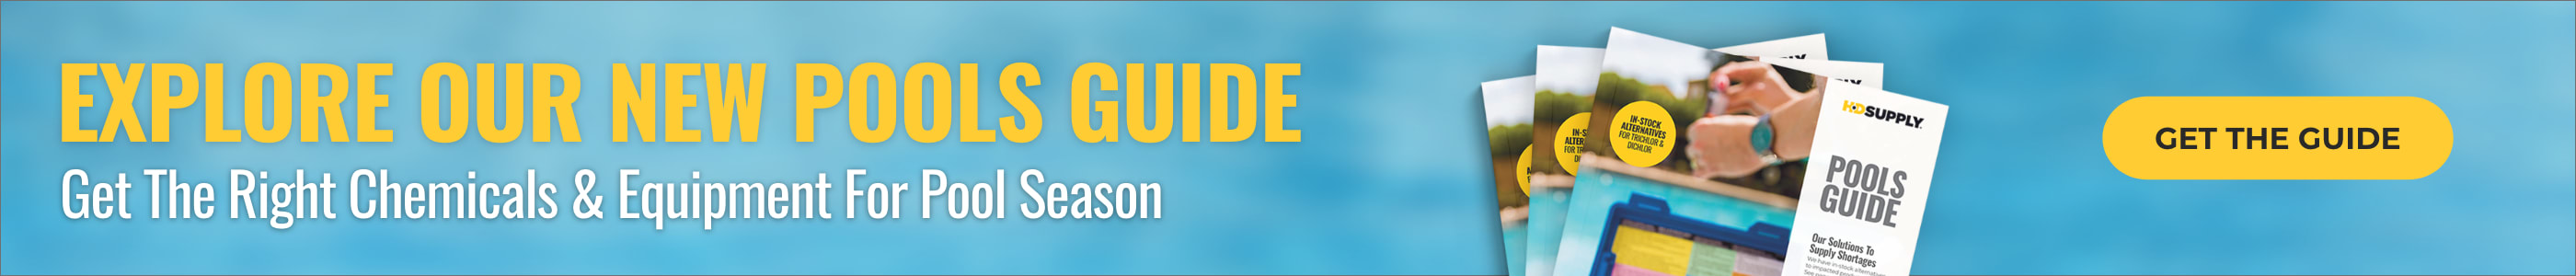 Explore Our New Pools Guide